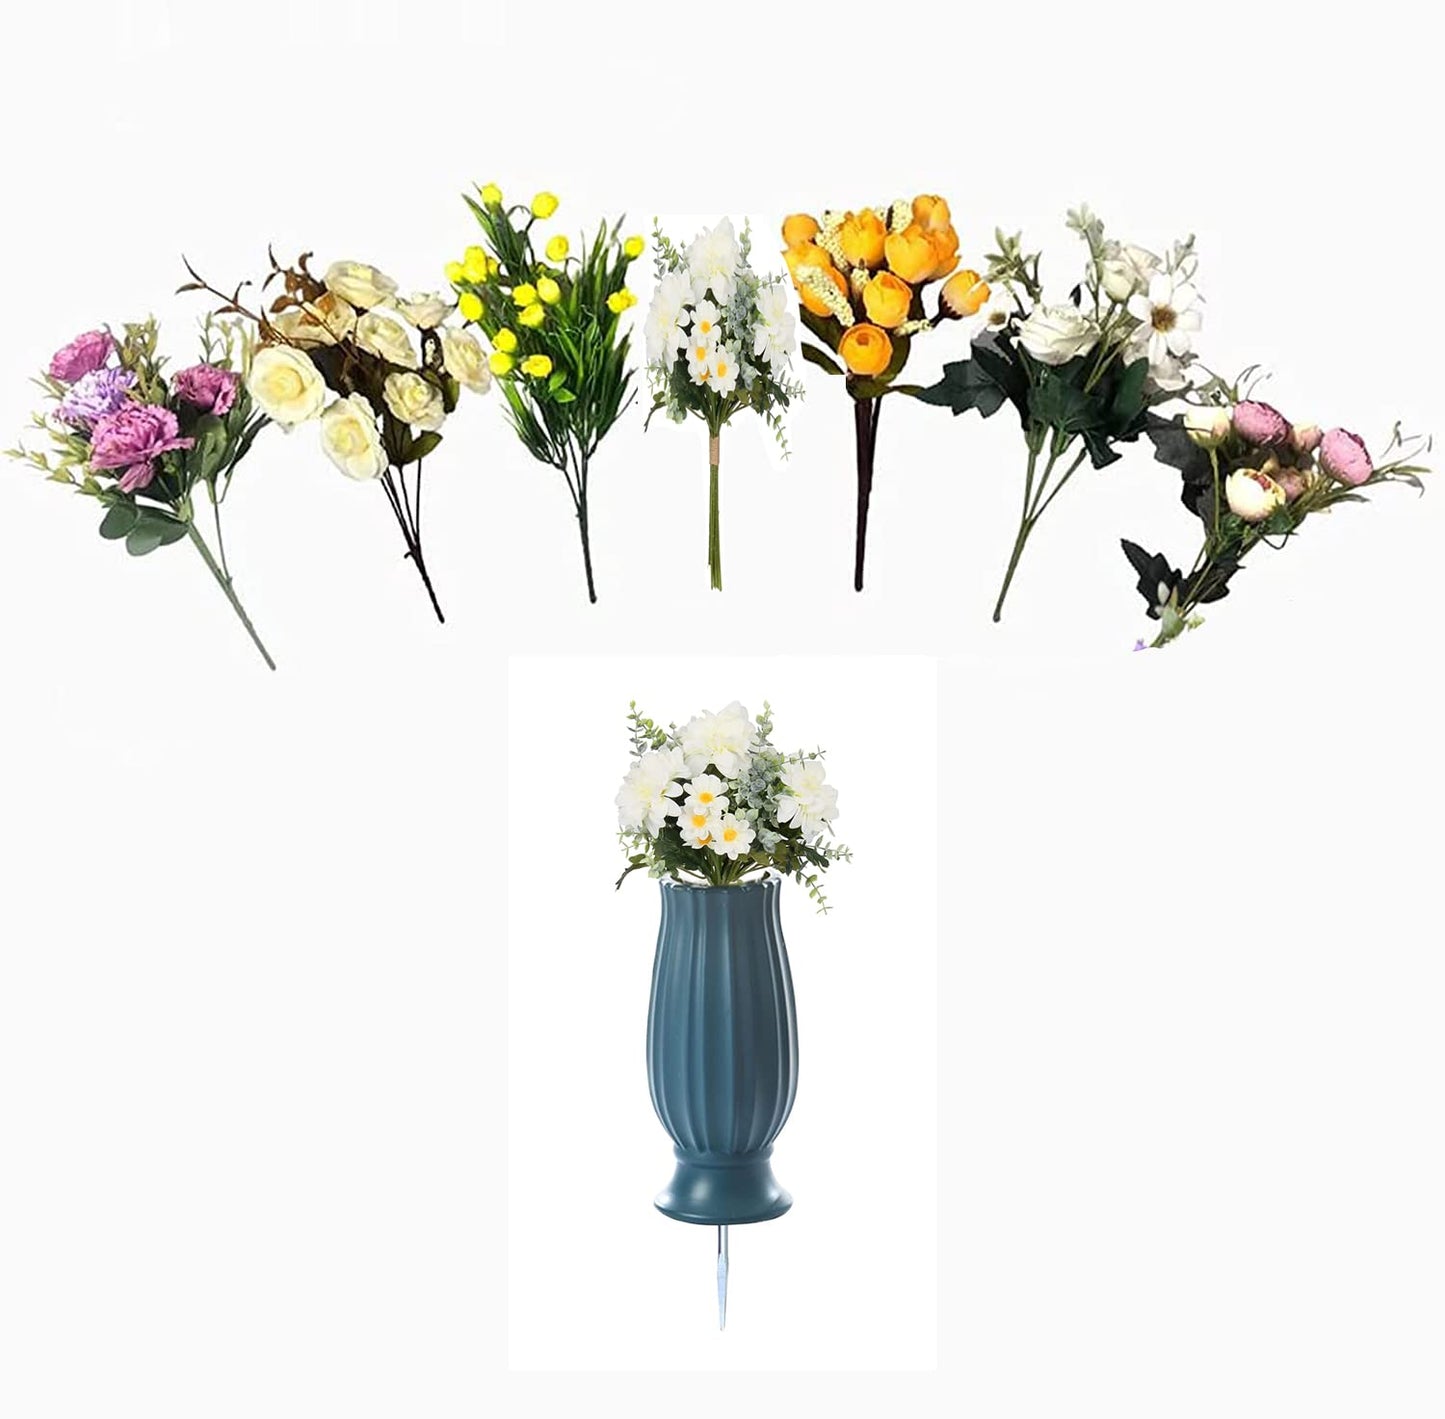 TFANUO Cemetery Vases with Spikes,Grave Vases for Cemetery with Metal Spikes and Drainage Holes,Cemetery Vases for Headstones Memorial Gifts Loss of Loved One